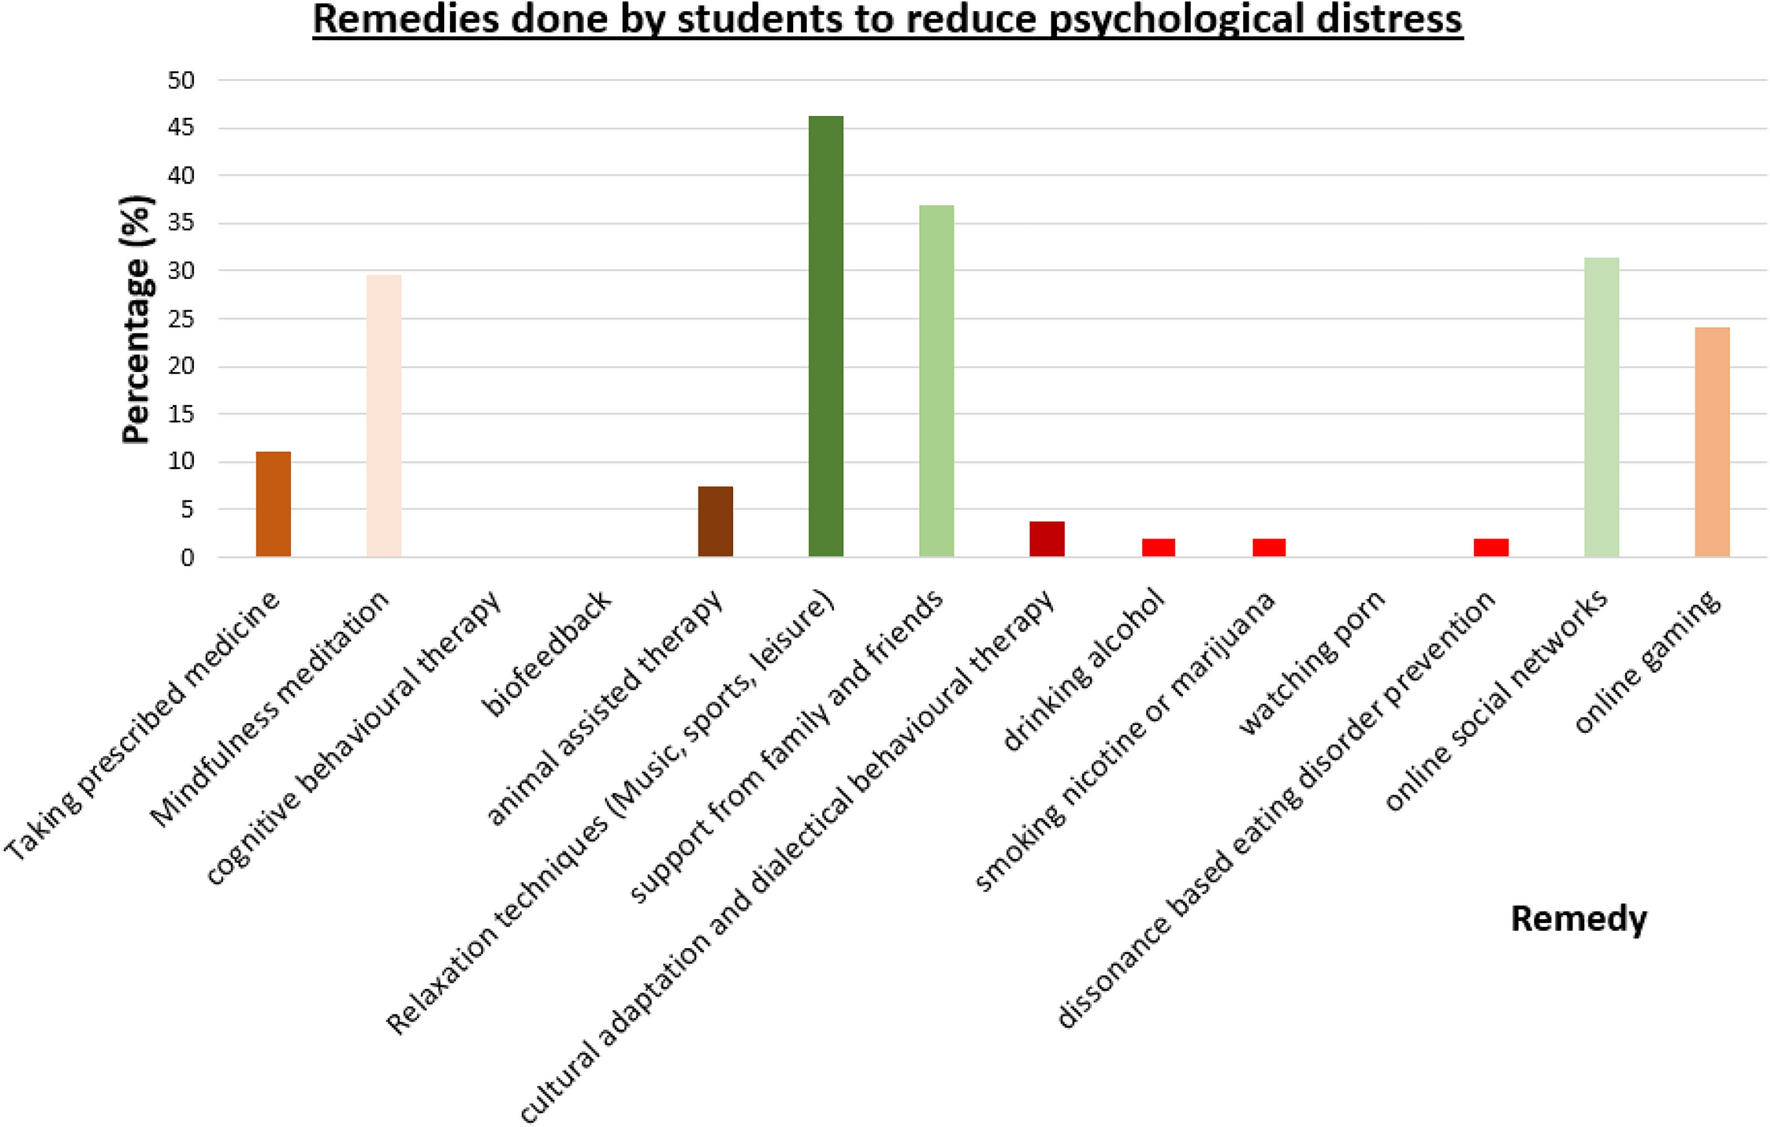 Student Sex To Ji - A study in University of Ruhuna for investigating prevalence, risk factors  and remedies for psychiatric illnesses among students | Scientific Reports